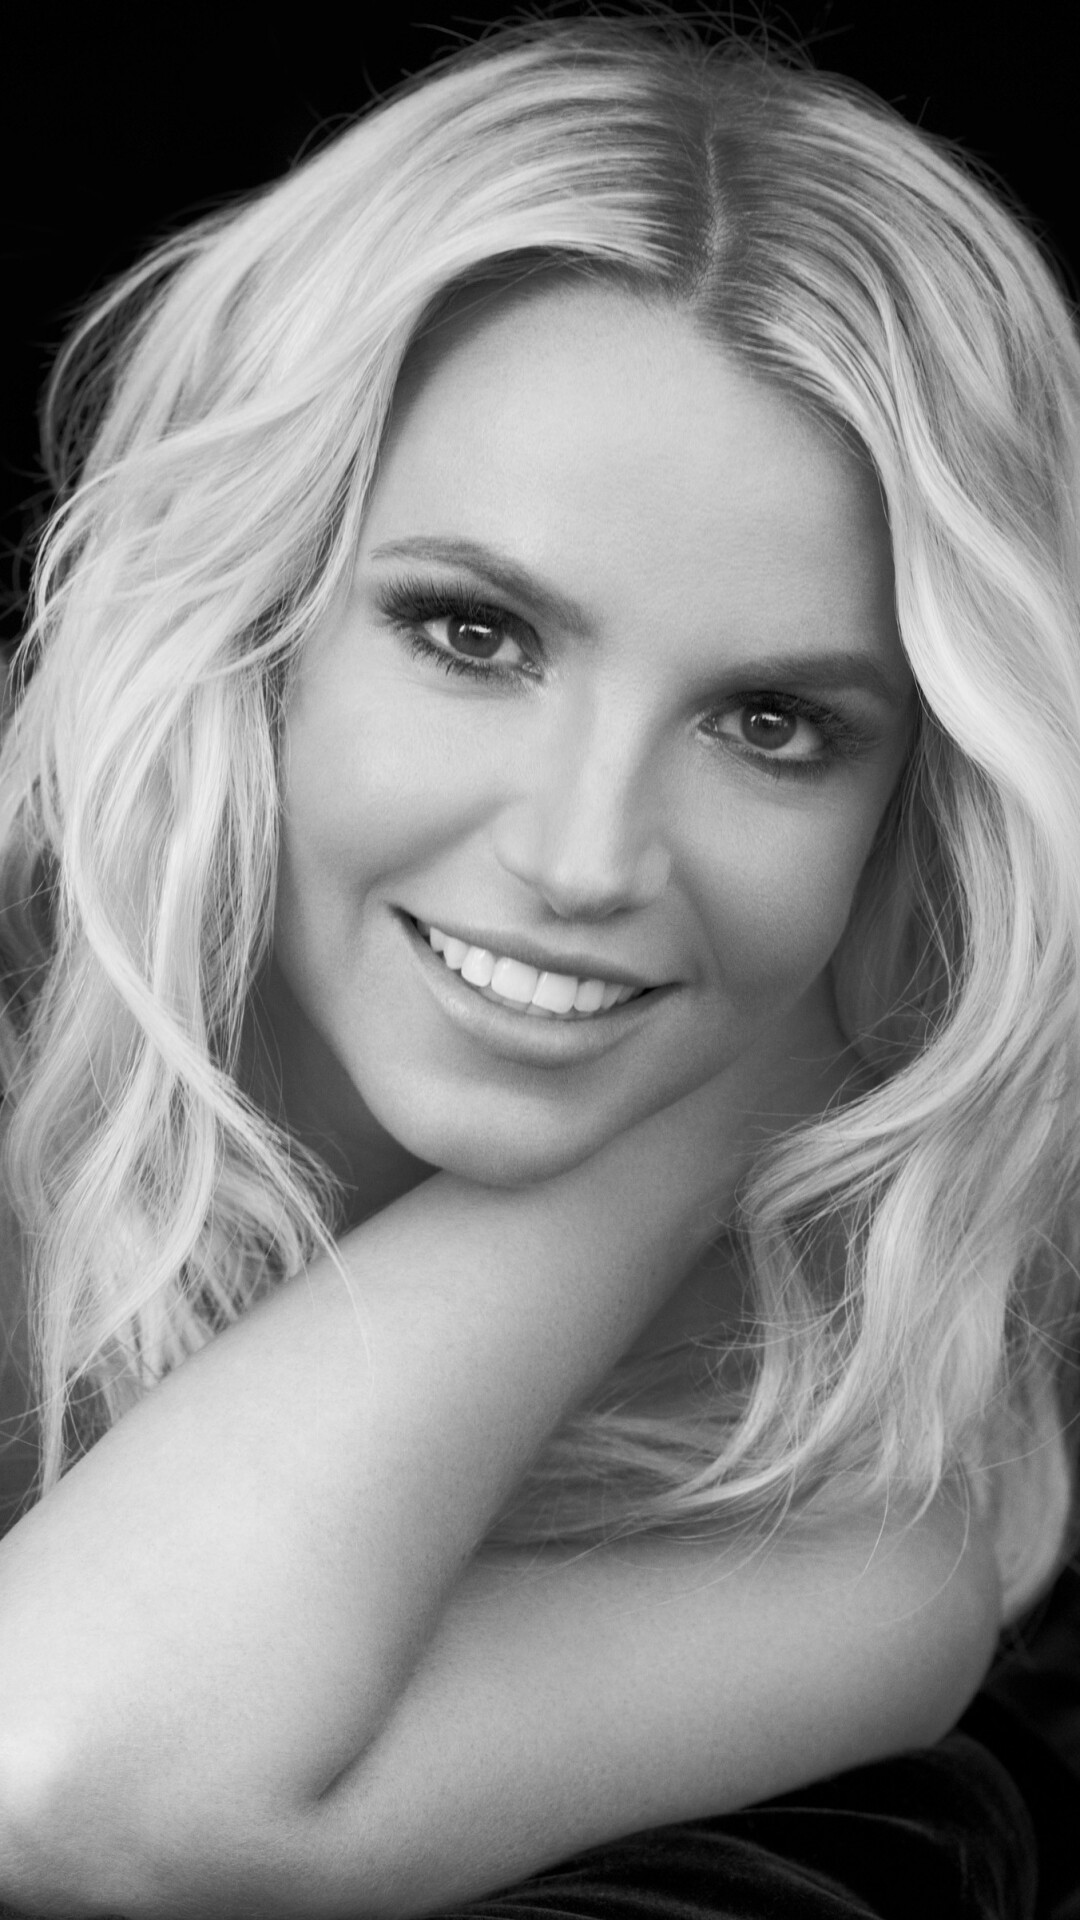 Britney Spears: Spears's cover version of Bobby Brown's “My Prerogative”, Released as the lead single from the album. 1080x1920 Full HD Background.